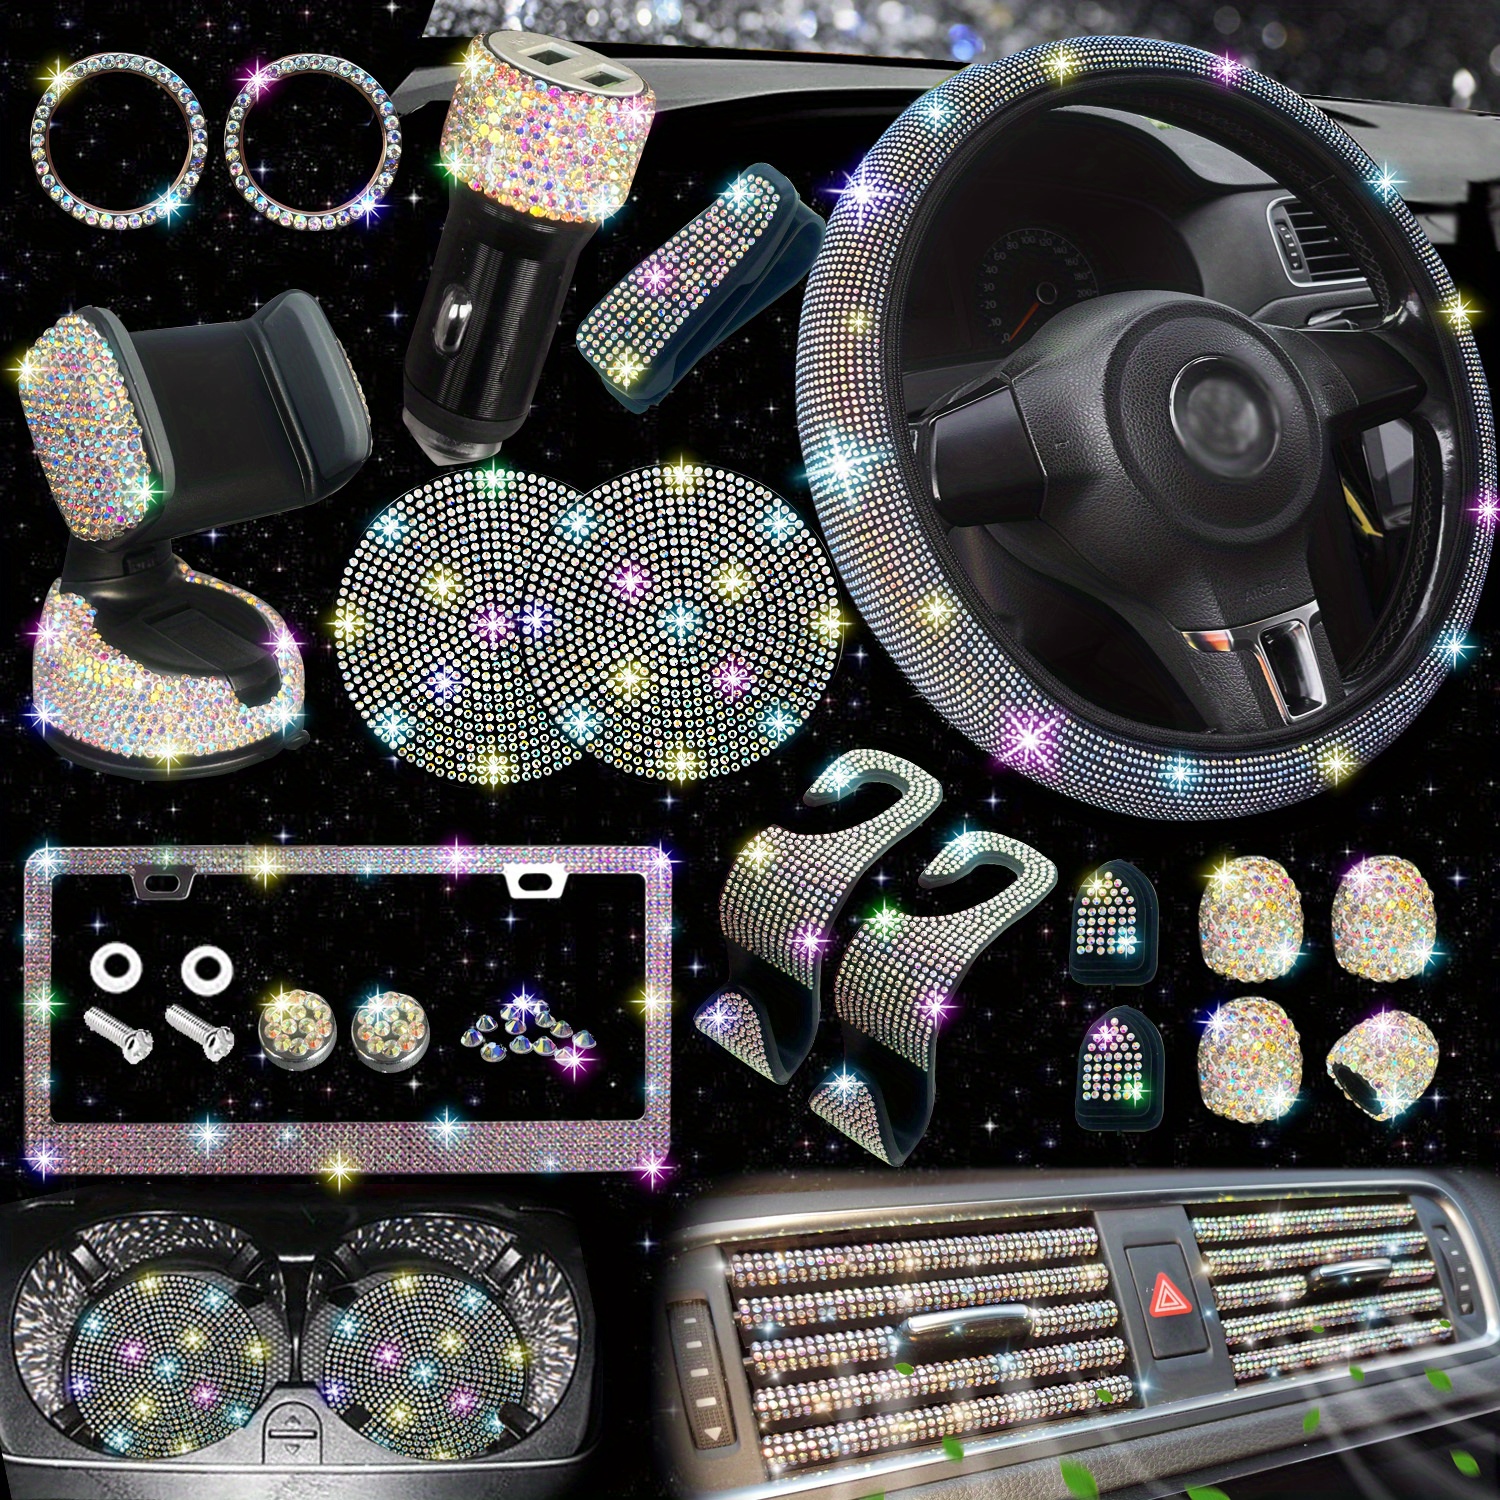 27pcs Bling Car Accessories Set Women Bling Steering Wheel Covers Universal  Fit 15 Inch Bling License Plate Frame Phone Holder Car Coasters, Today's  Best Daily Deals